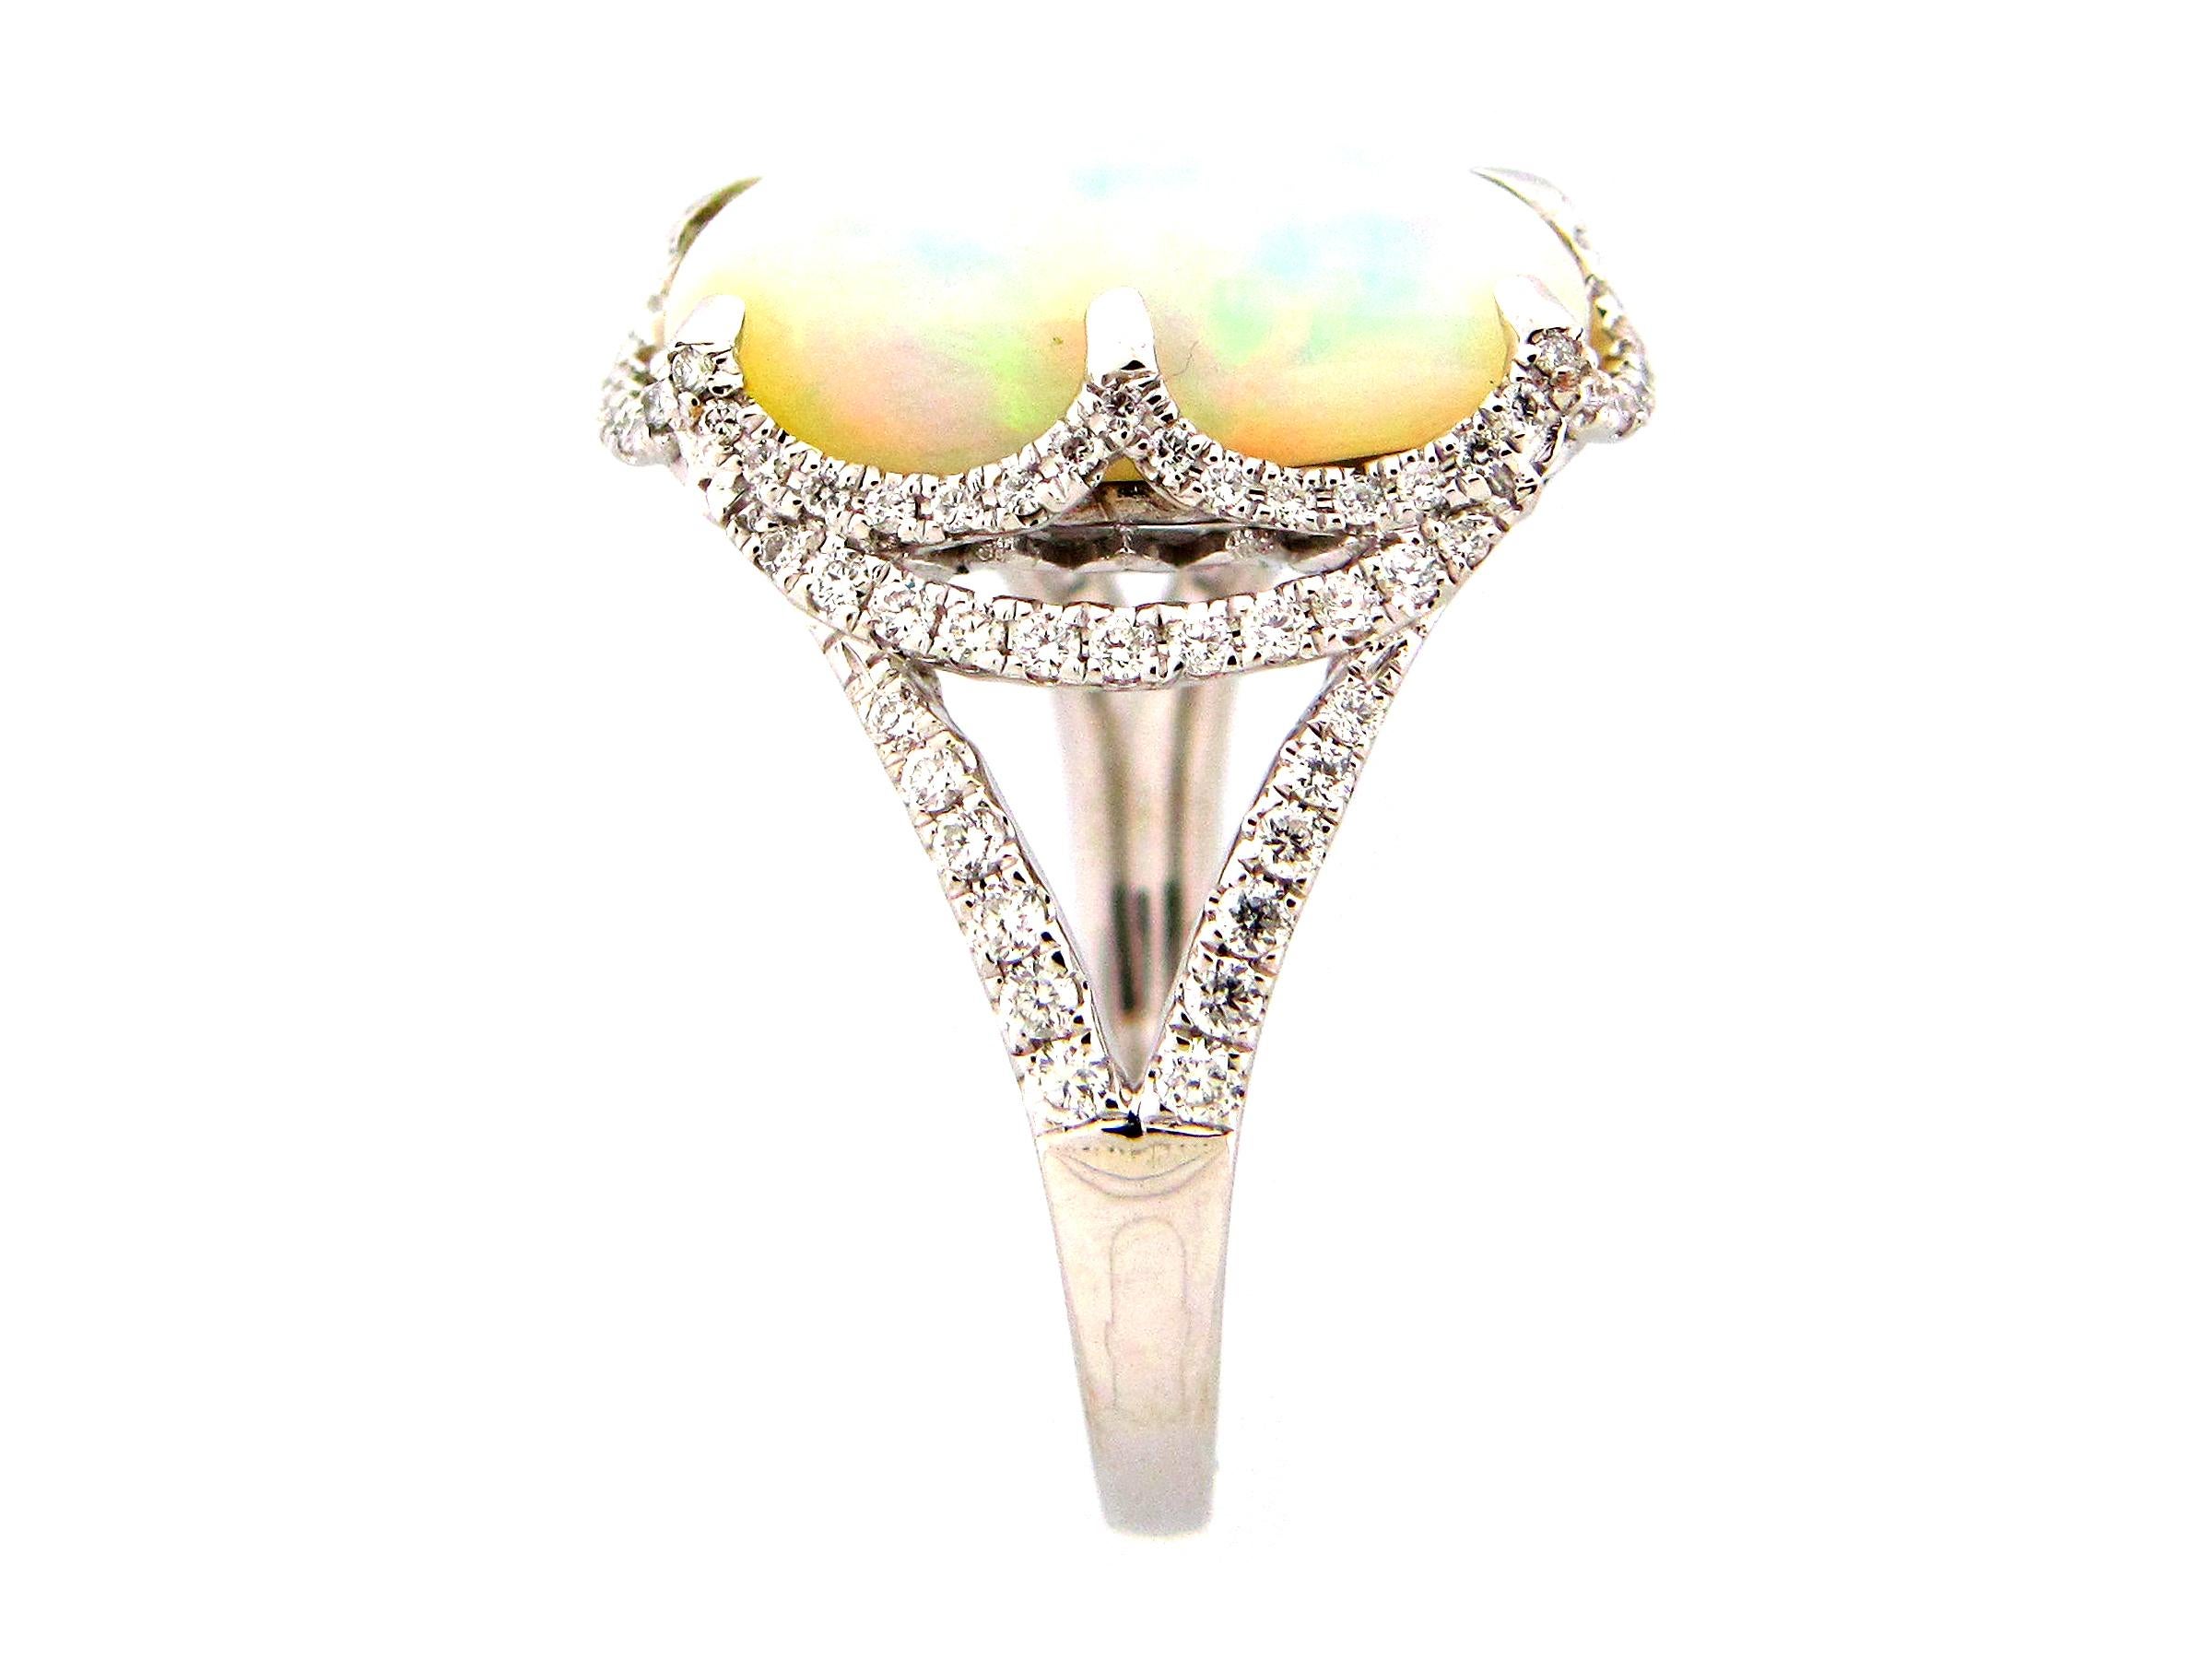 This stunning cocktail ring showcases a beautiful 3.71 Carat Cushion Ethiopian Opal with a Diamond Halo on a Diamond Shank. This ring is set in 18k White Gold. Total Diamond Weight = 0.46 Carats. Ring Size is 6 1/2.